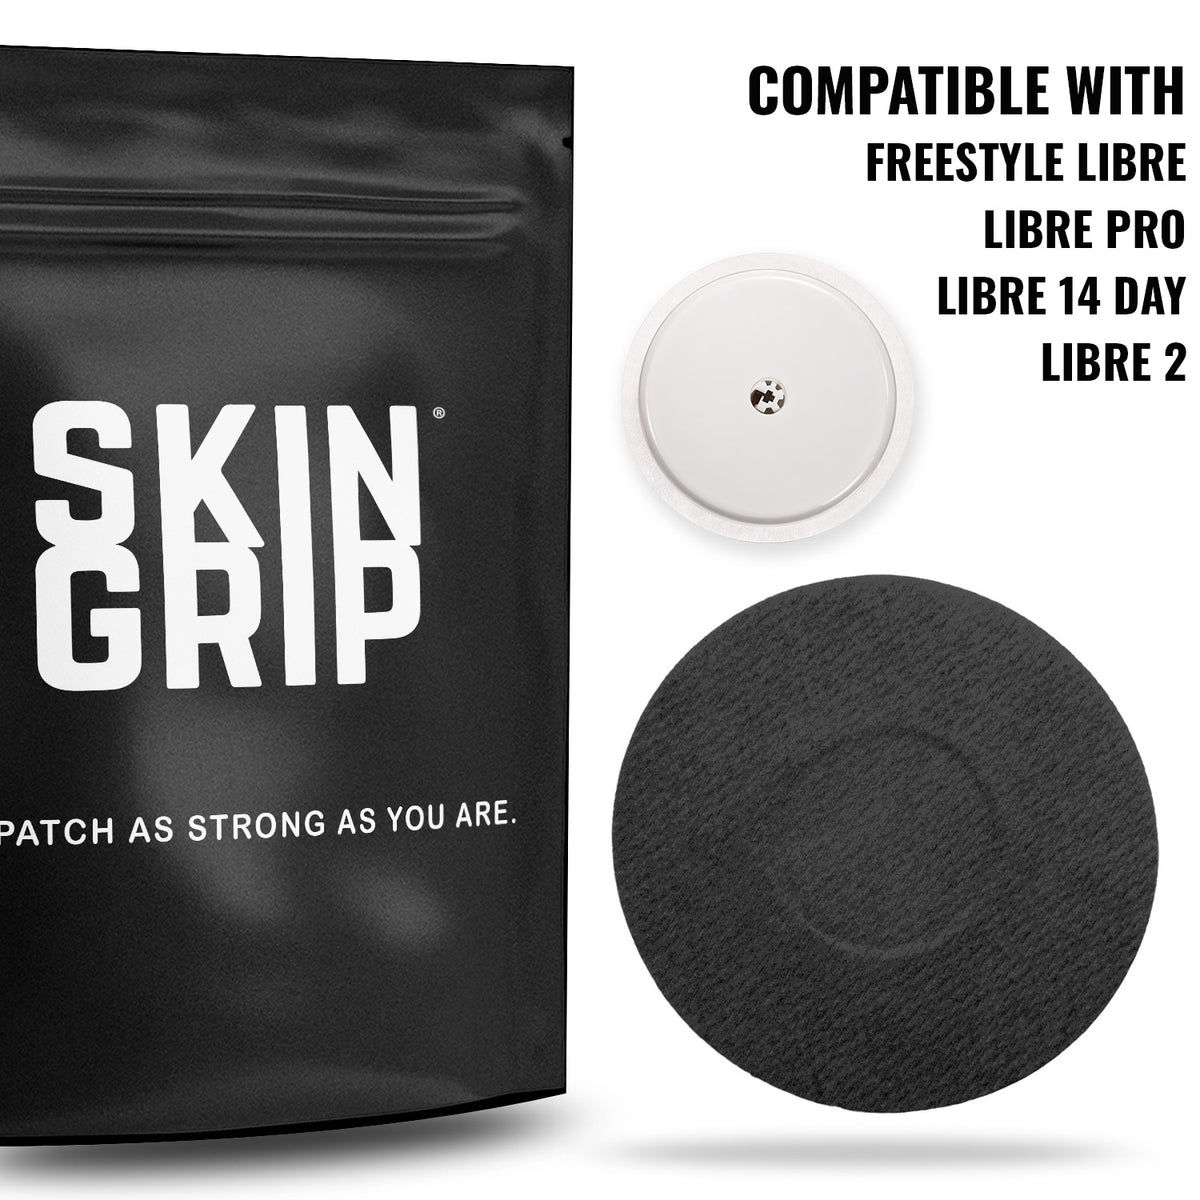 Skin Grip MAX Freestyle Libre 2 Patches - 10 Pack